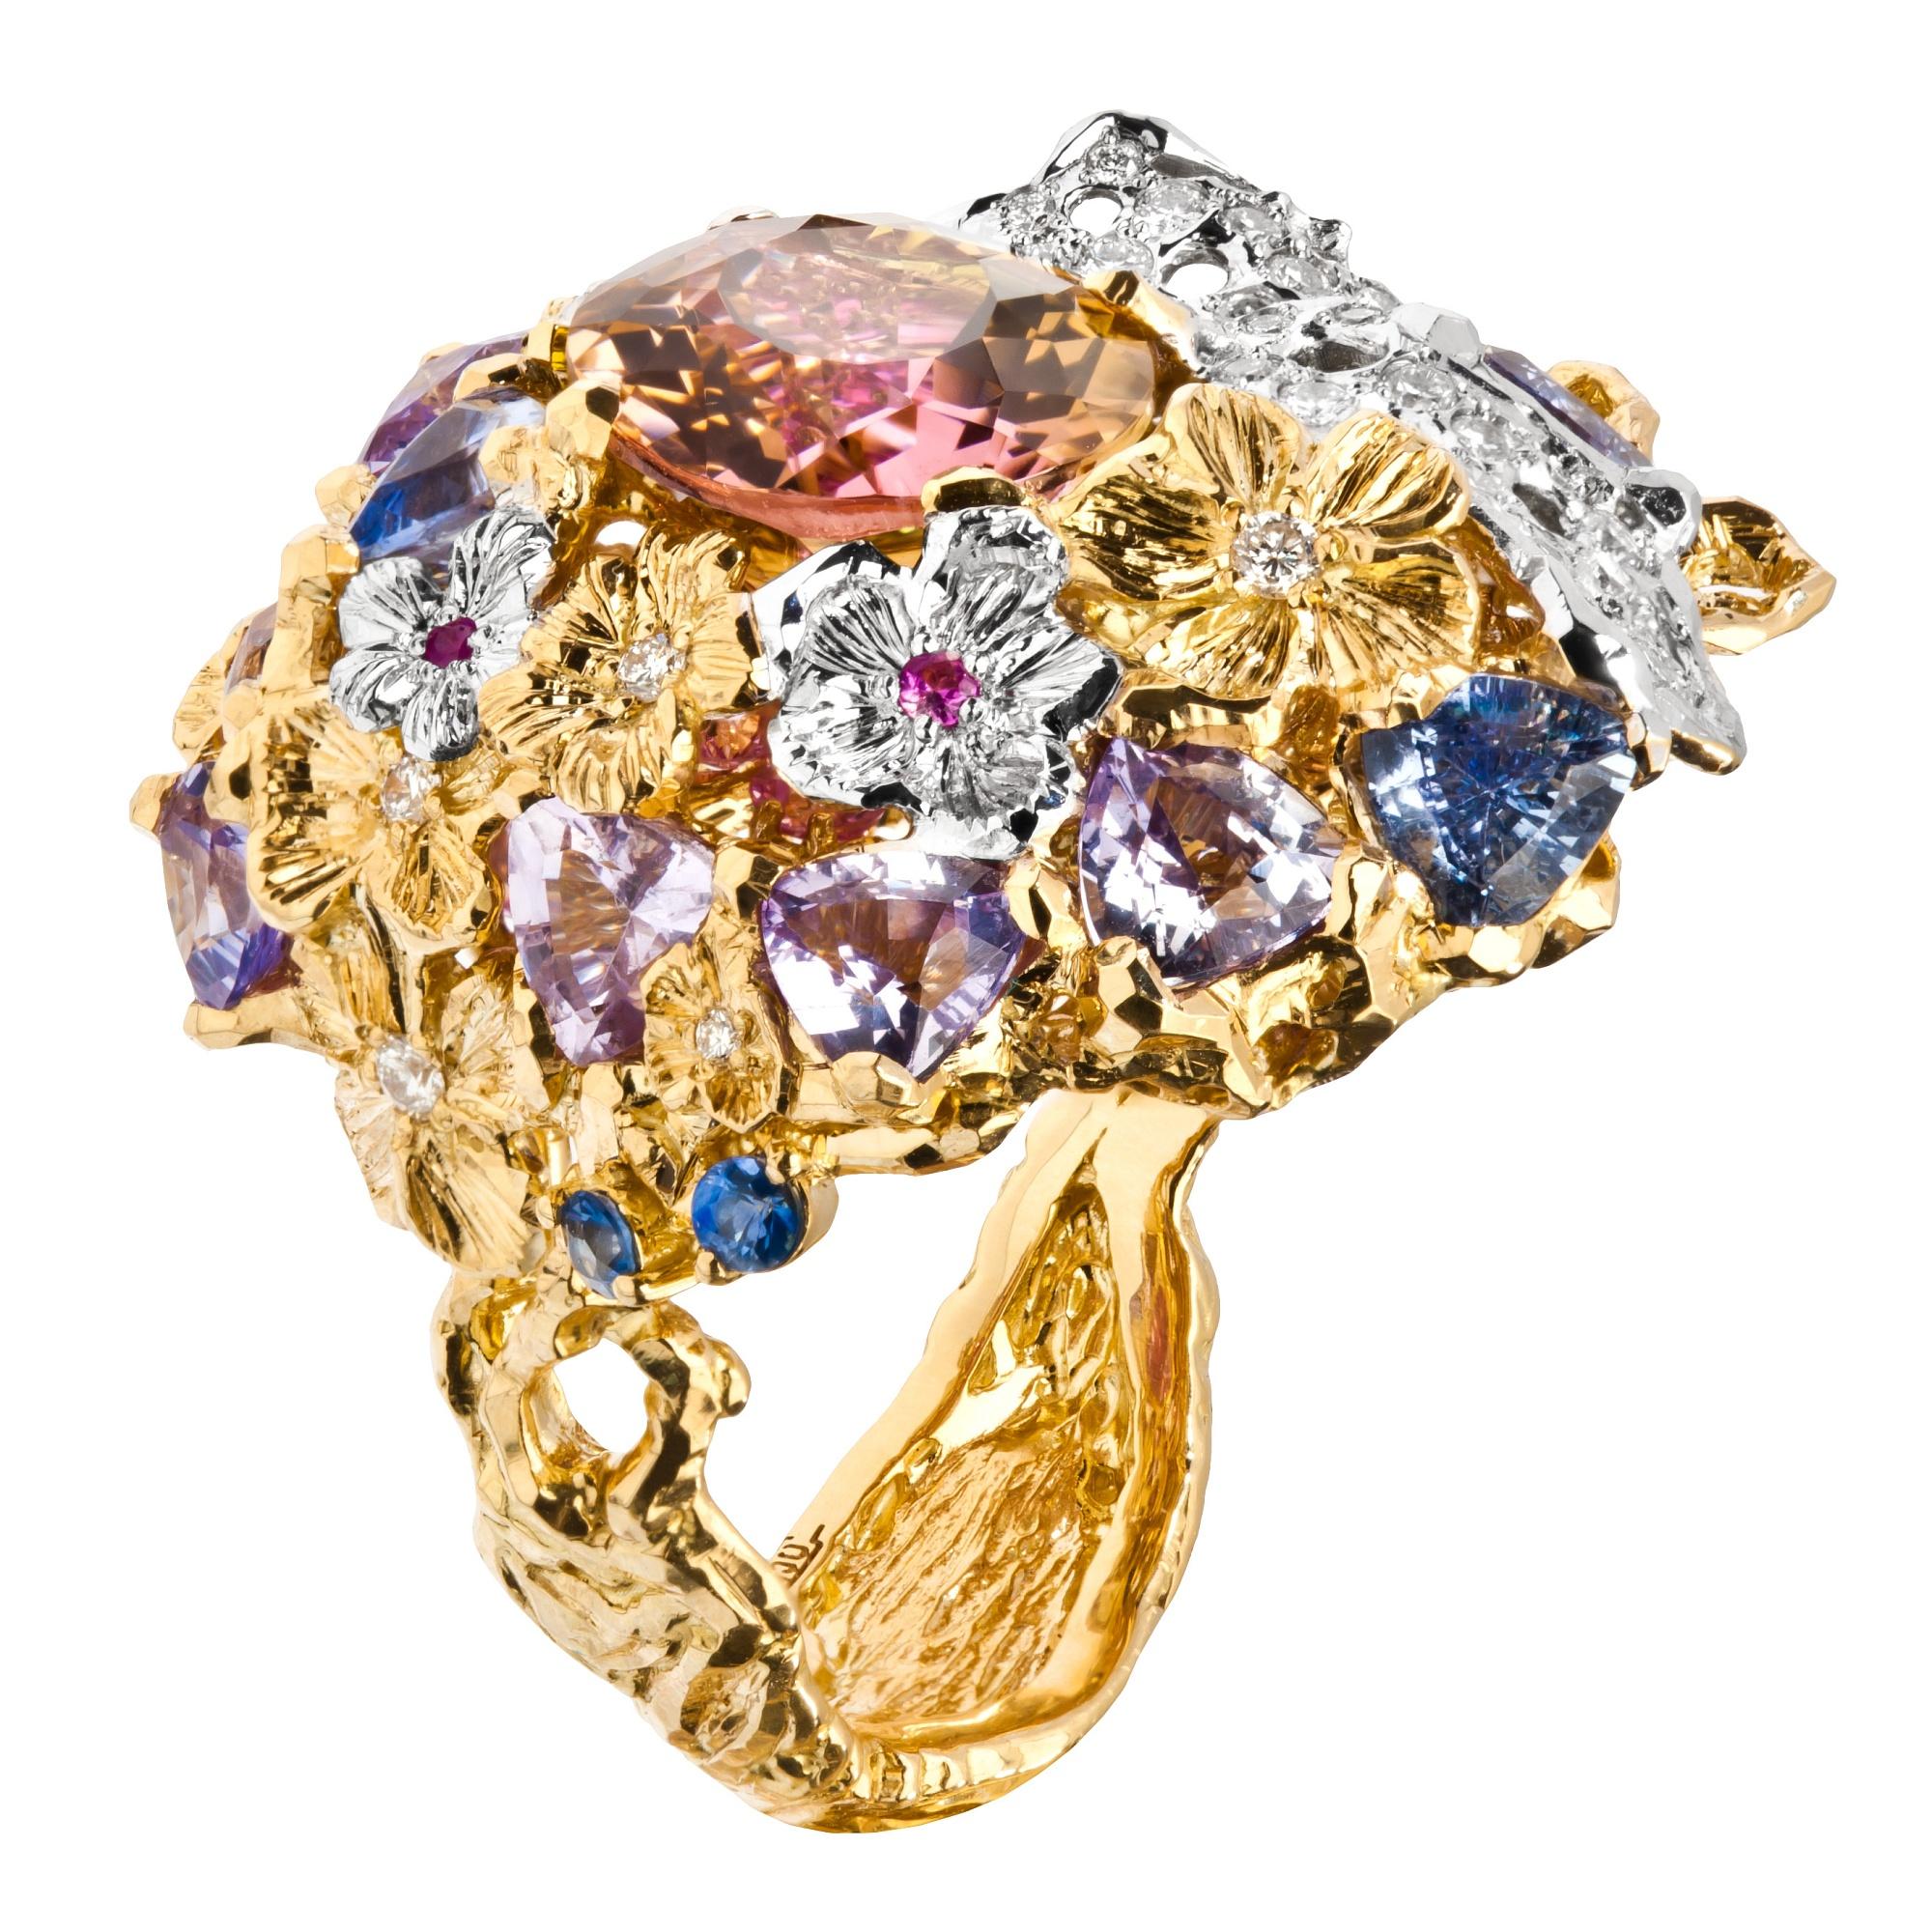 Inspired by Impressionism, MOISEIKIN® has created a blooming flower ring in a tridimensional manner. Trembling flowers and the sweet fragrance of coming ripe fruits are embodied in precious gemstones and metal. Between two layers of yellow and white